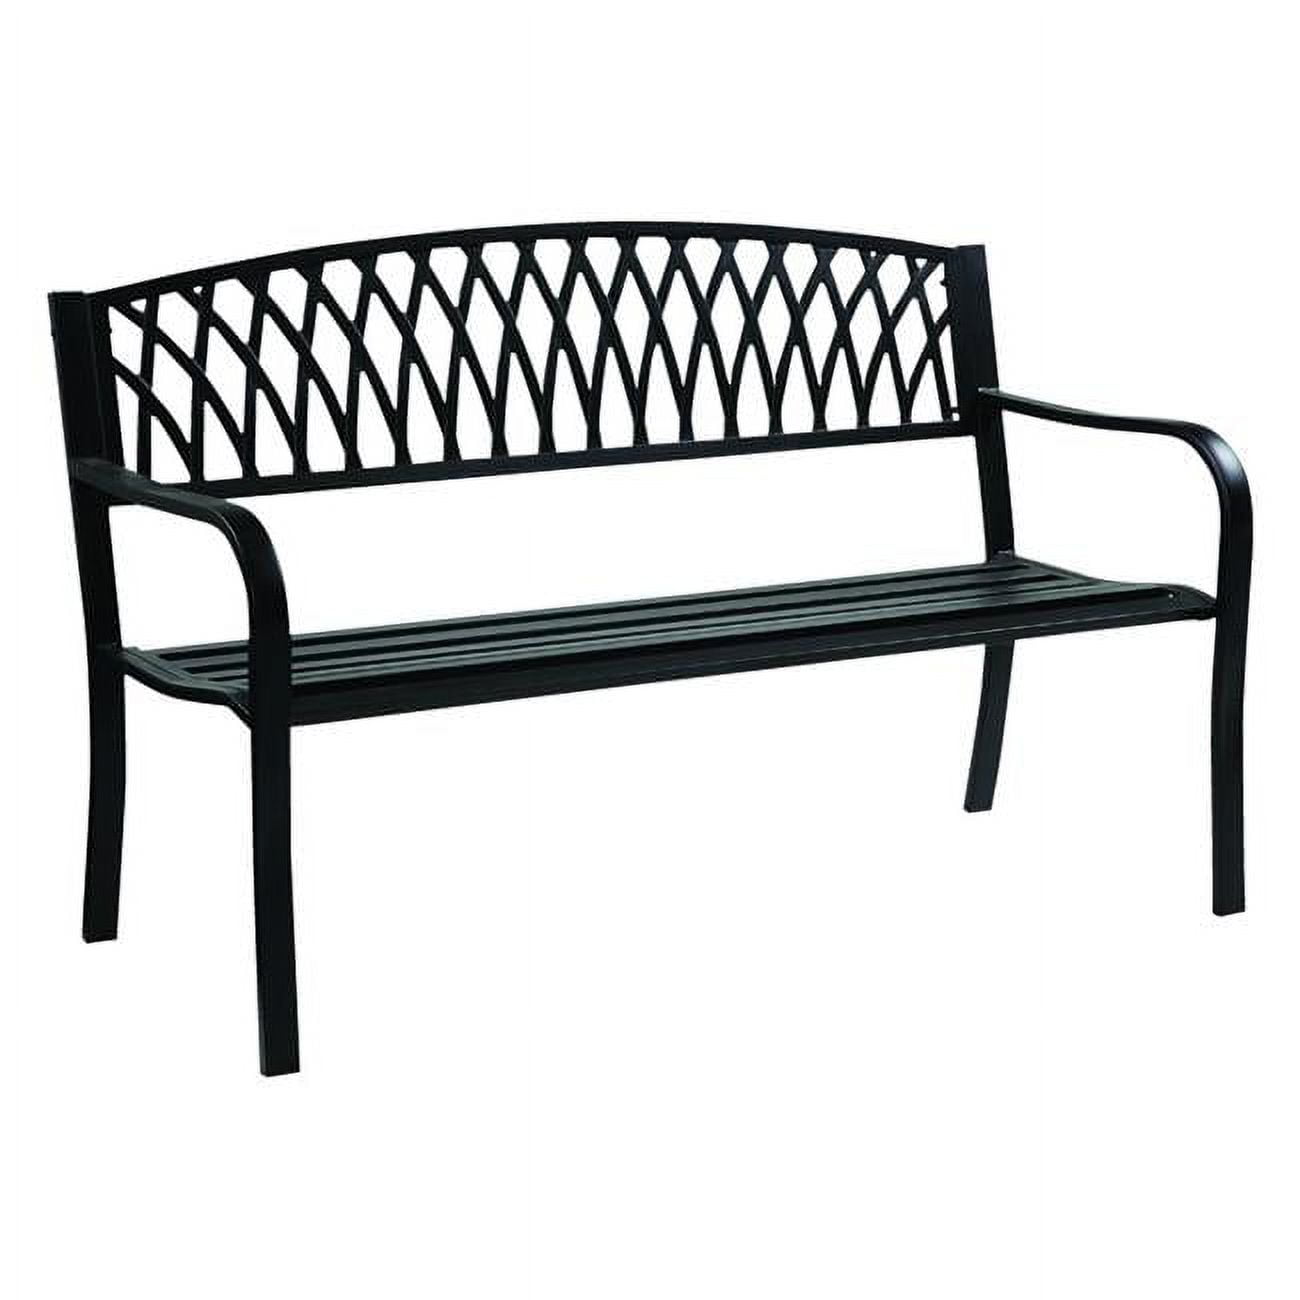 Picture of Living Accents 8014609 Steel Grass Back Park Bench - 33.46 x 50 x 23.62 in.